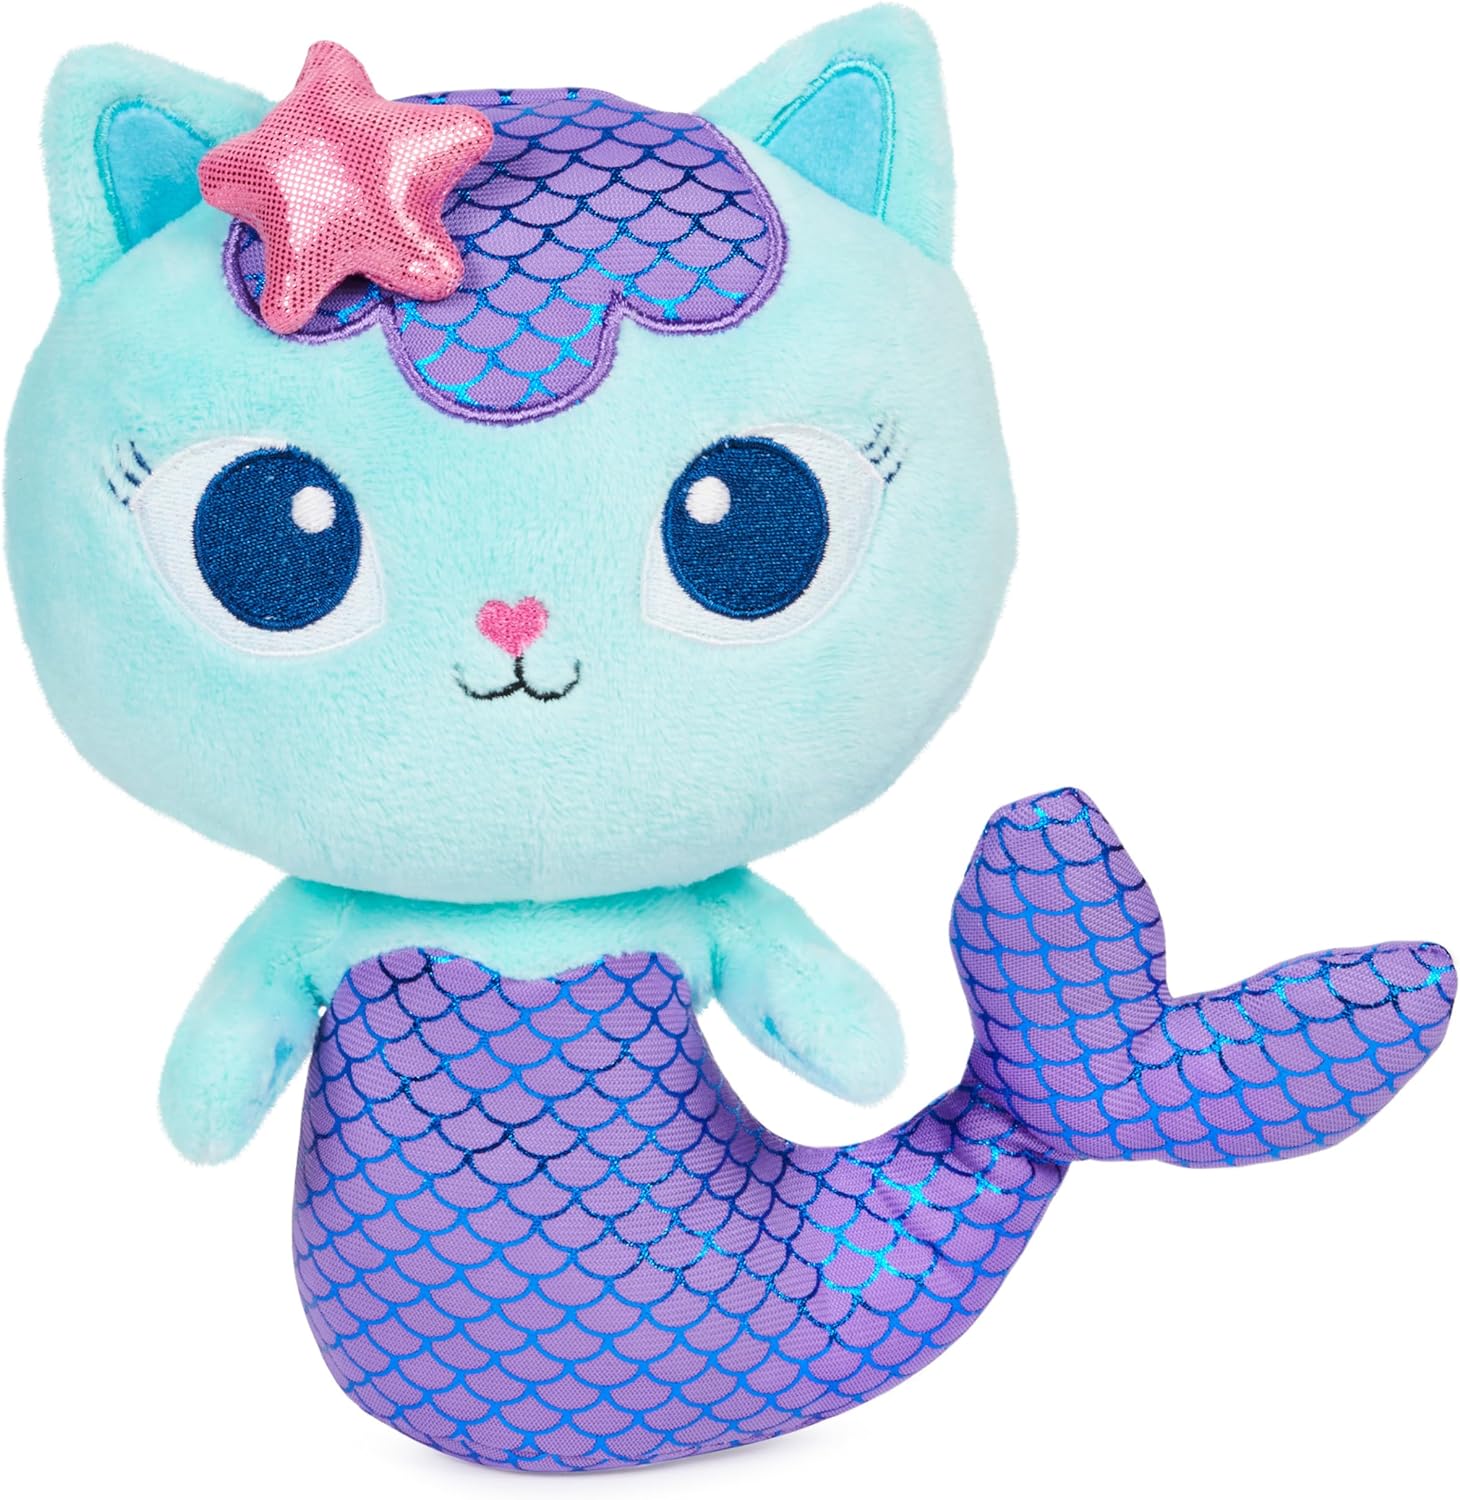 Gabby's Dollhouse, 8-inch Mercat Purr-ific Plush Toy, Kids Toys for Ages 3 and up